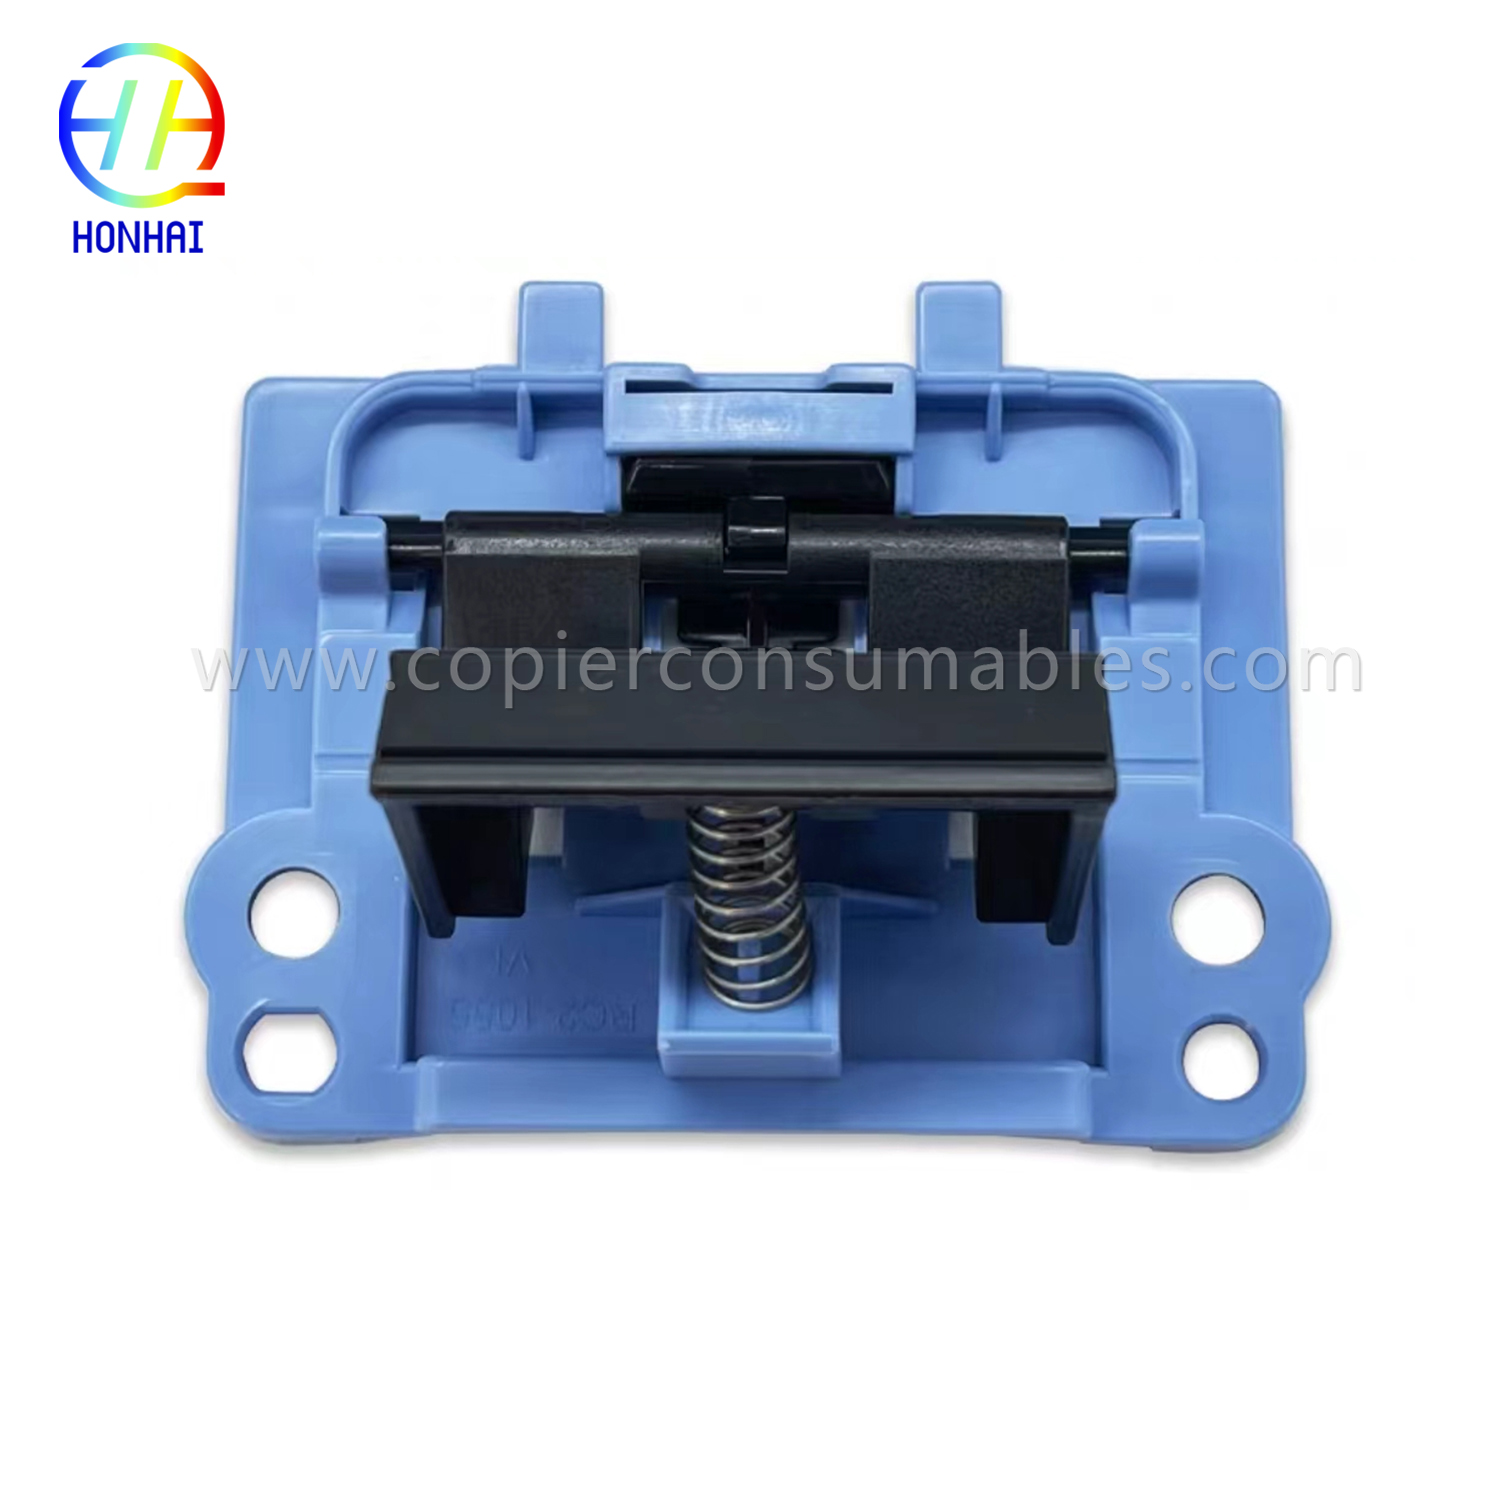 Separation Pad for HP Laserjet M1522n M1522NF P1505 P1505n PRO-M1536dnf P1606dn (RM1-4207-000 RM1-4227-000)